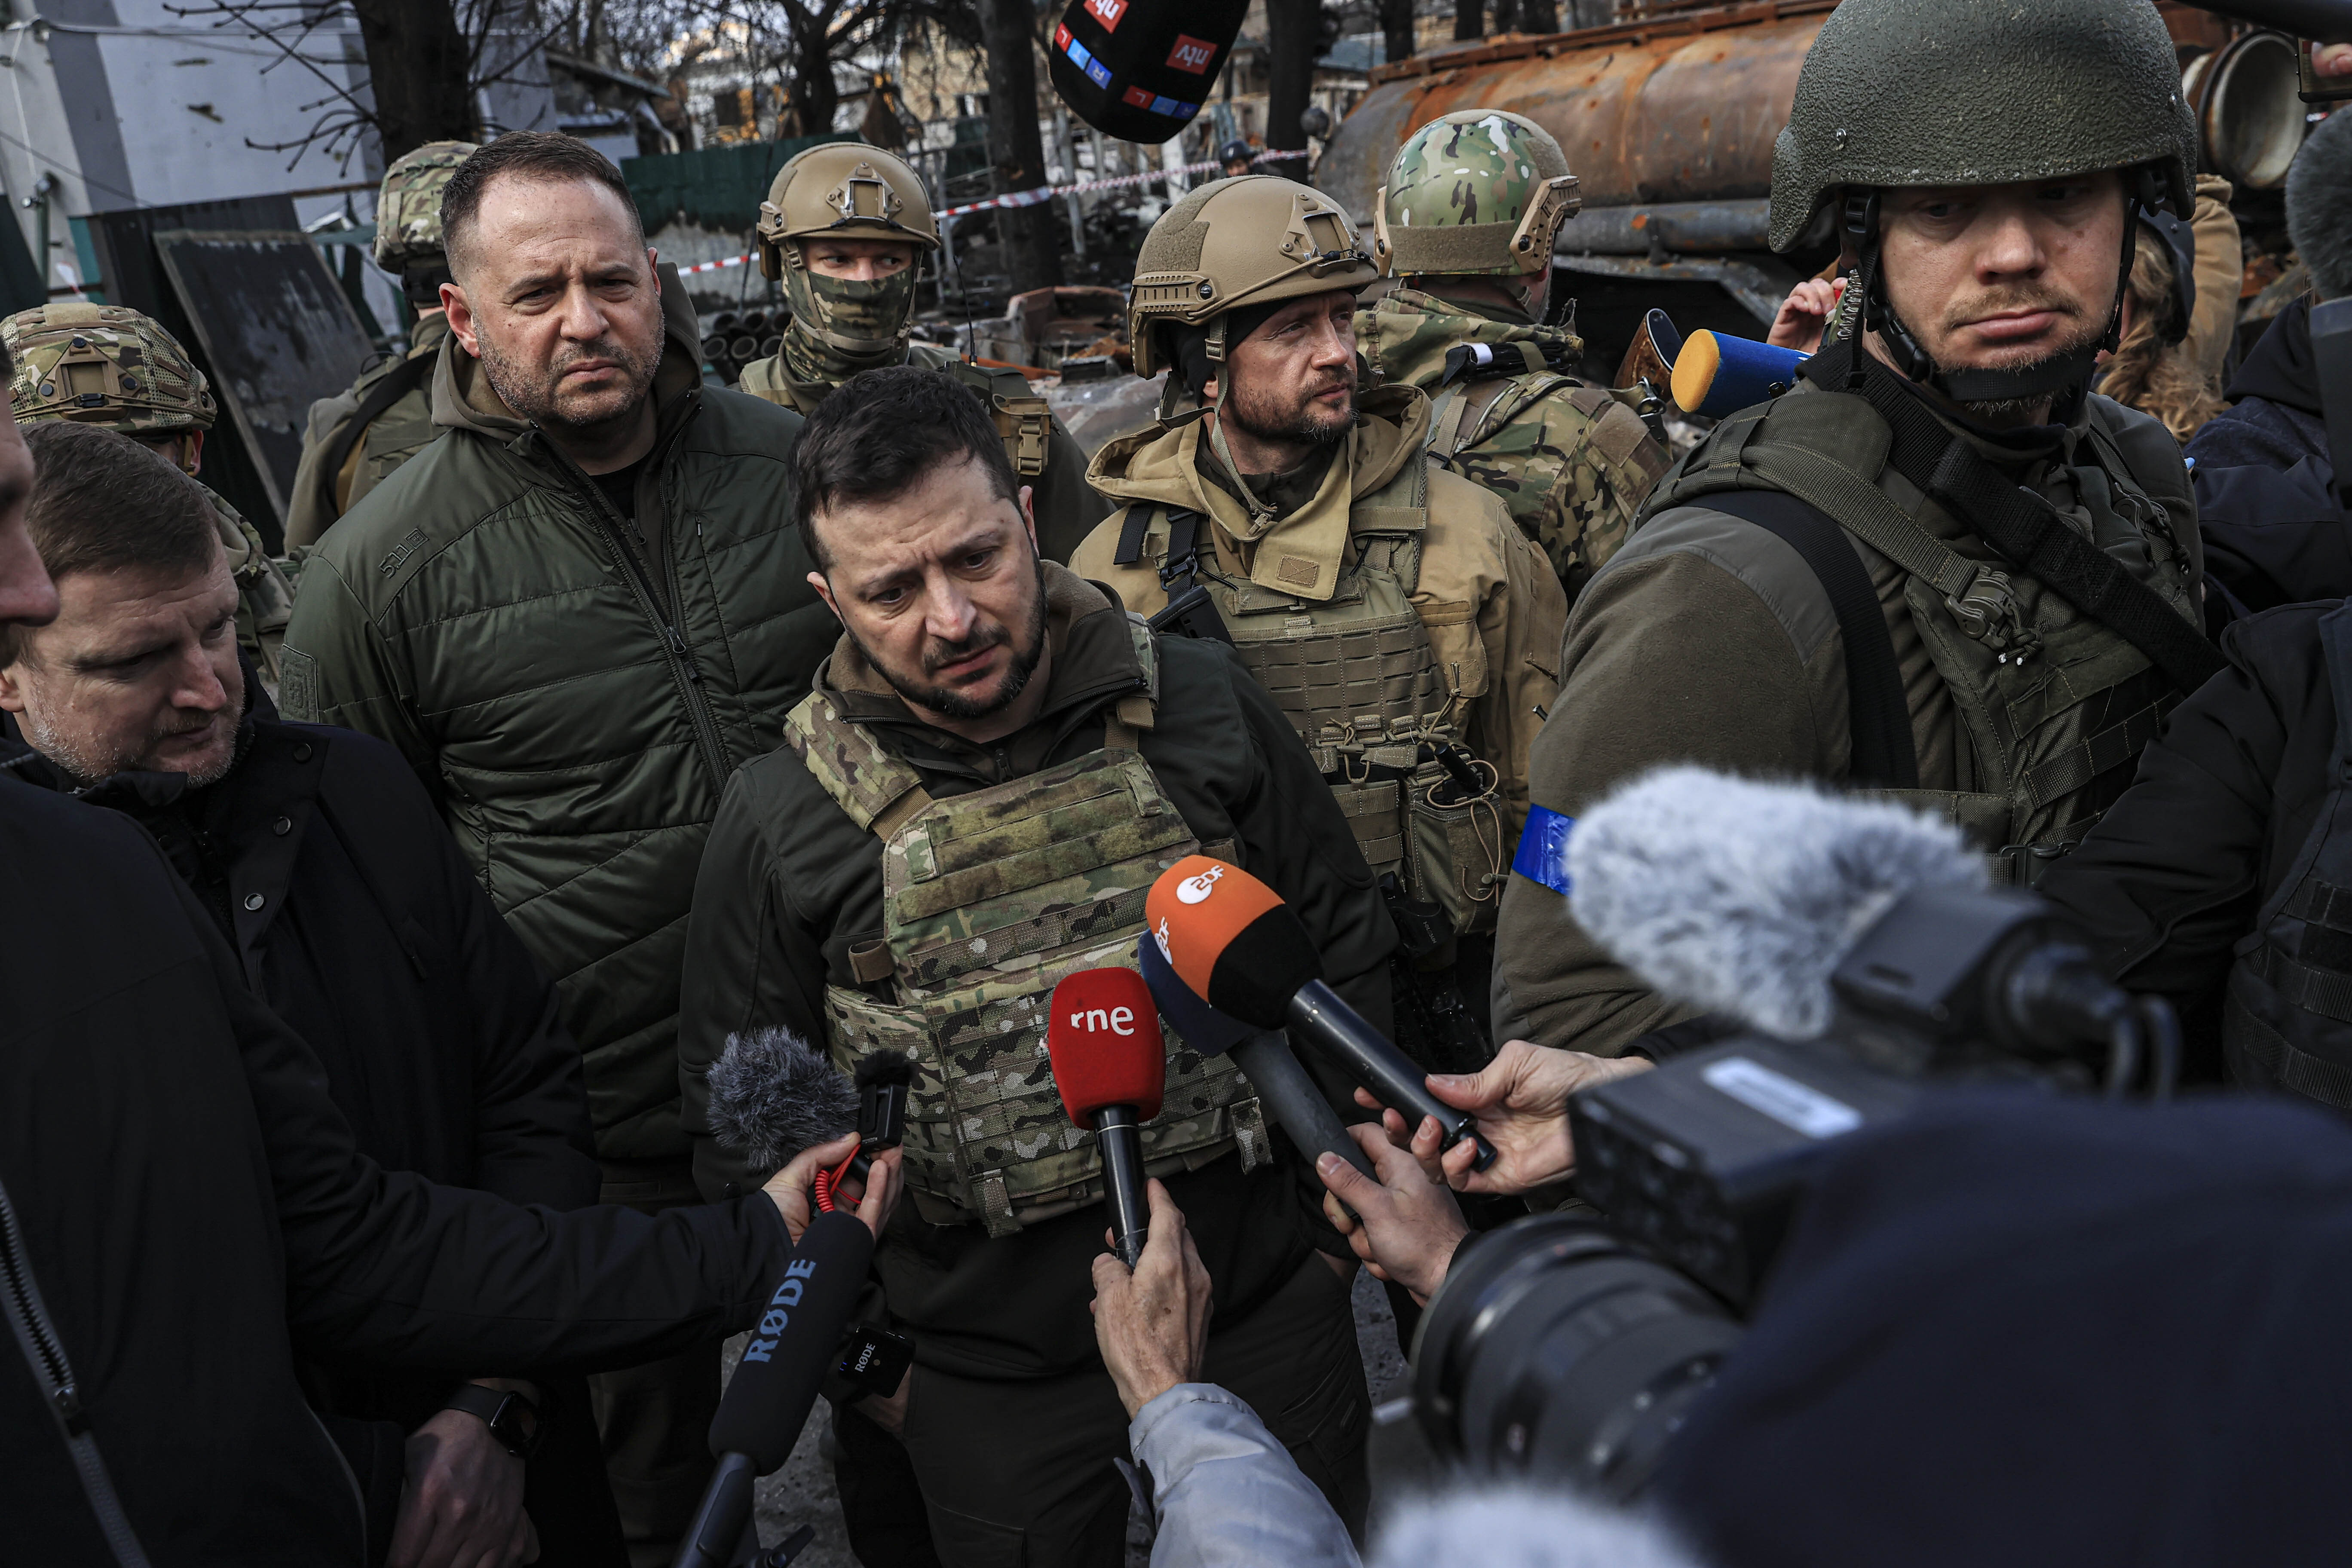 Ukrainian President Volodymyr Zelensky, accompanied by Ukrainian soldiers, speaks to the press during his visit to the town of Bucha, Ukraine, on April 4.